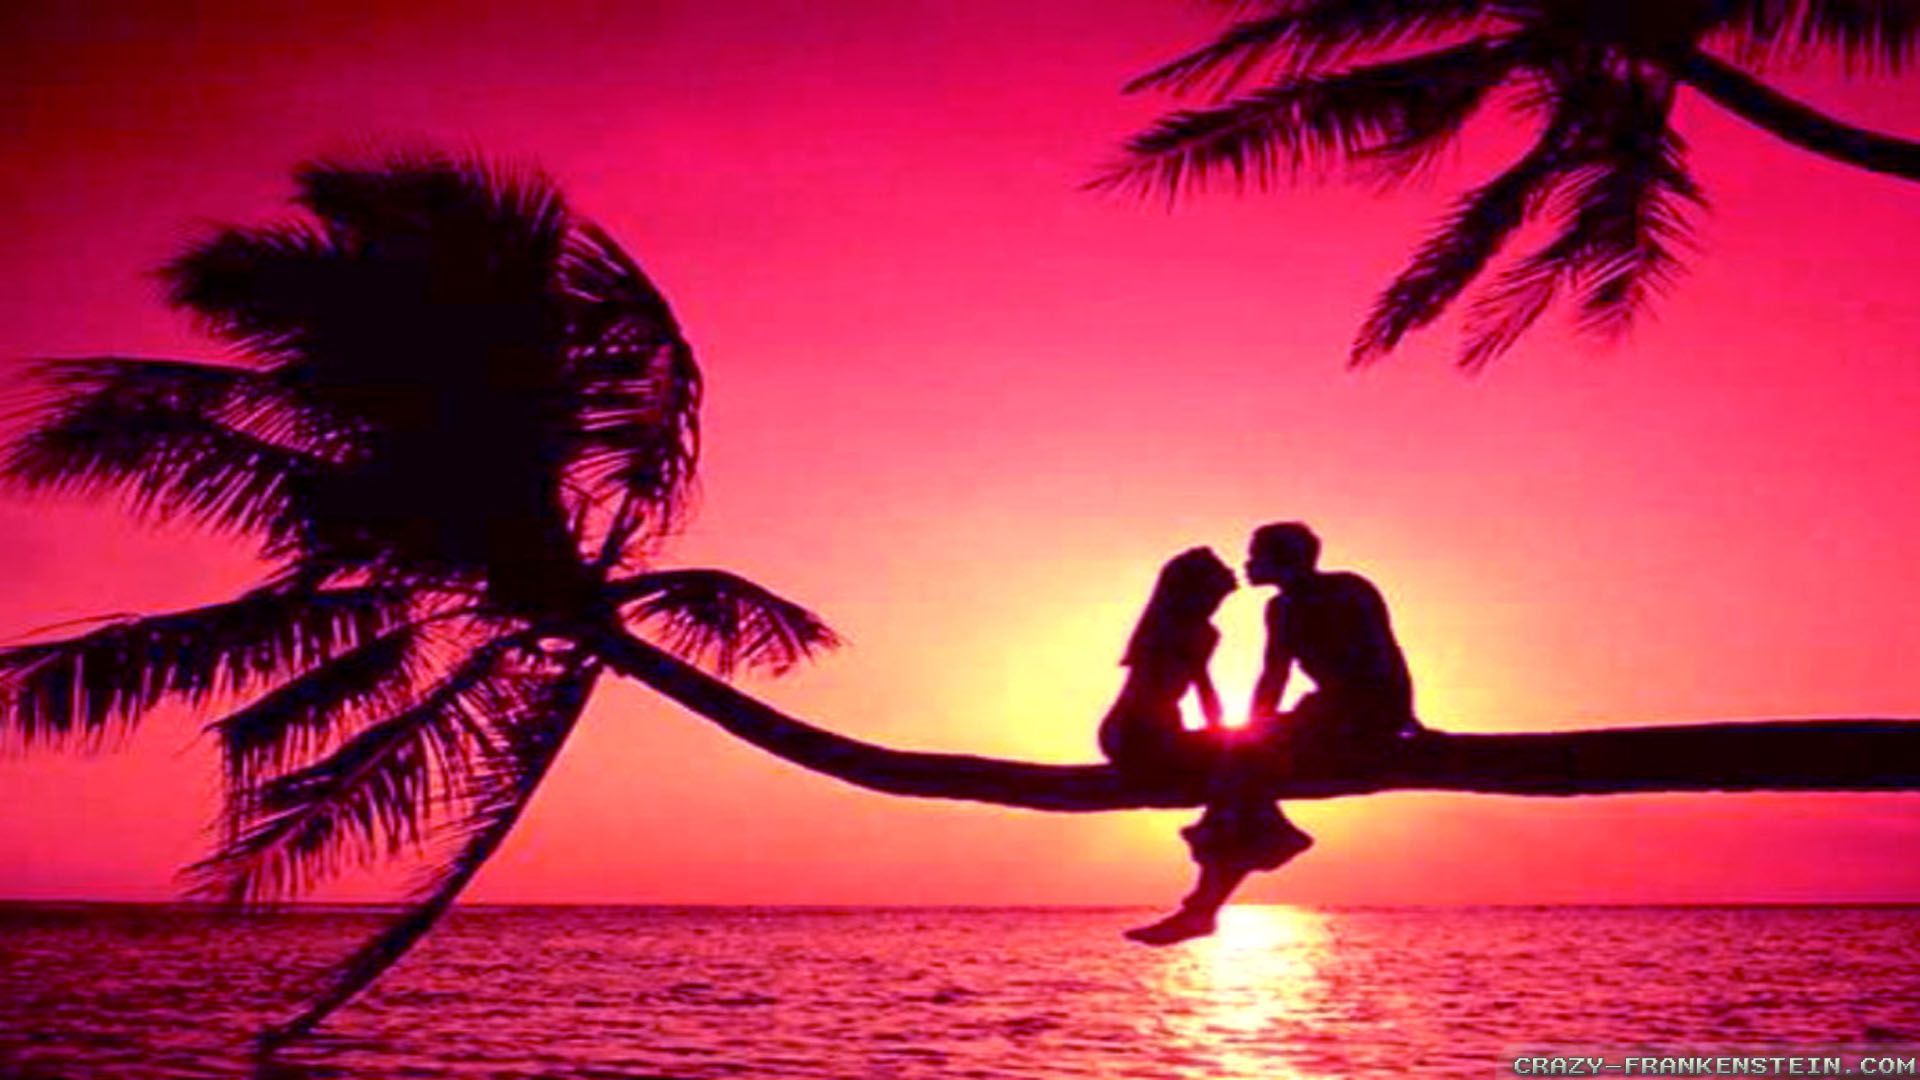 romantic wallpaper full size,people in nature,sky,romance,palm tree,sunset